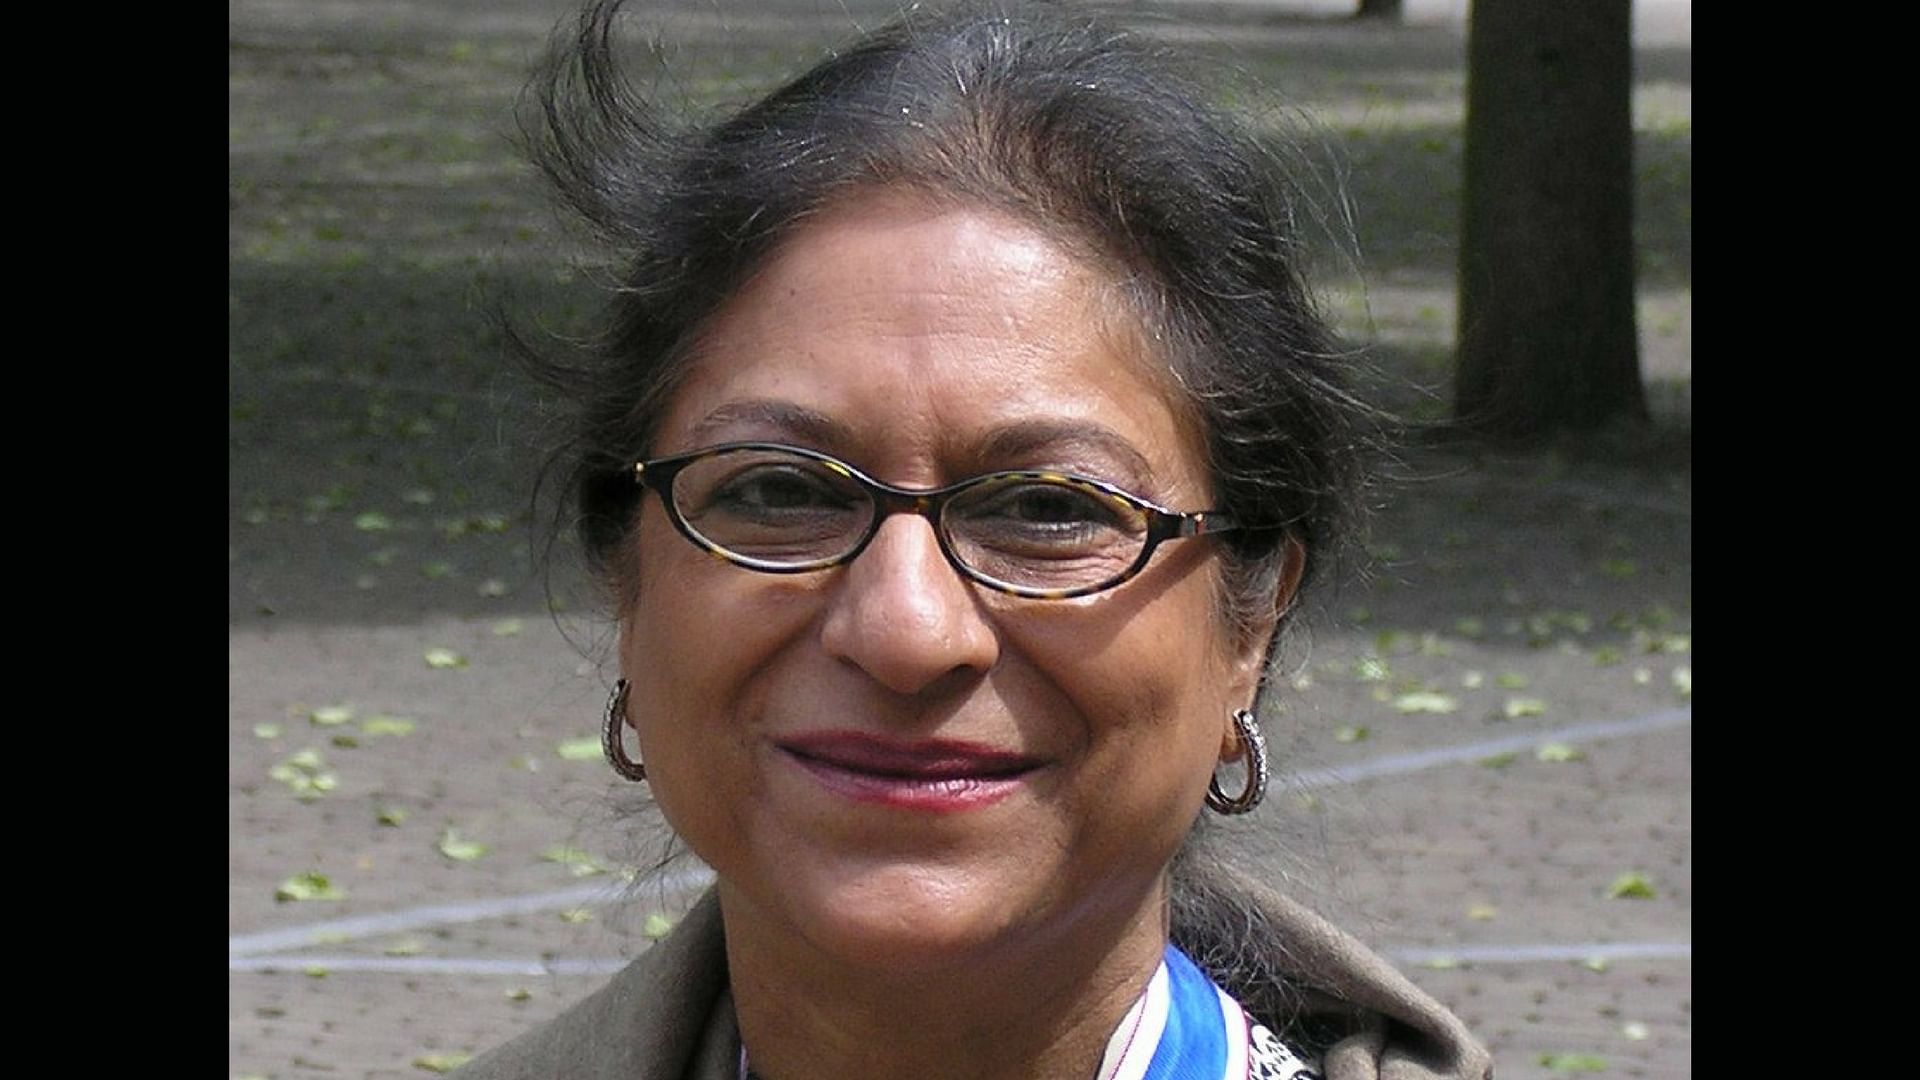 Pakistan’s well known human rights lawyer and social activist Asma Jahangir died in Lahore, on Sunday, 11 February, of cardiac arrest.